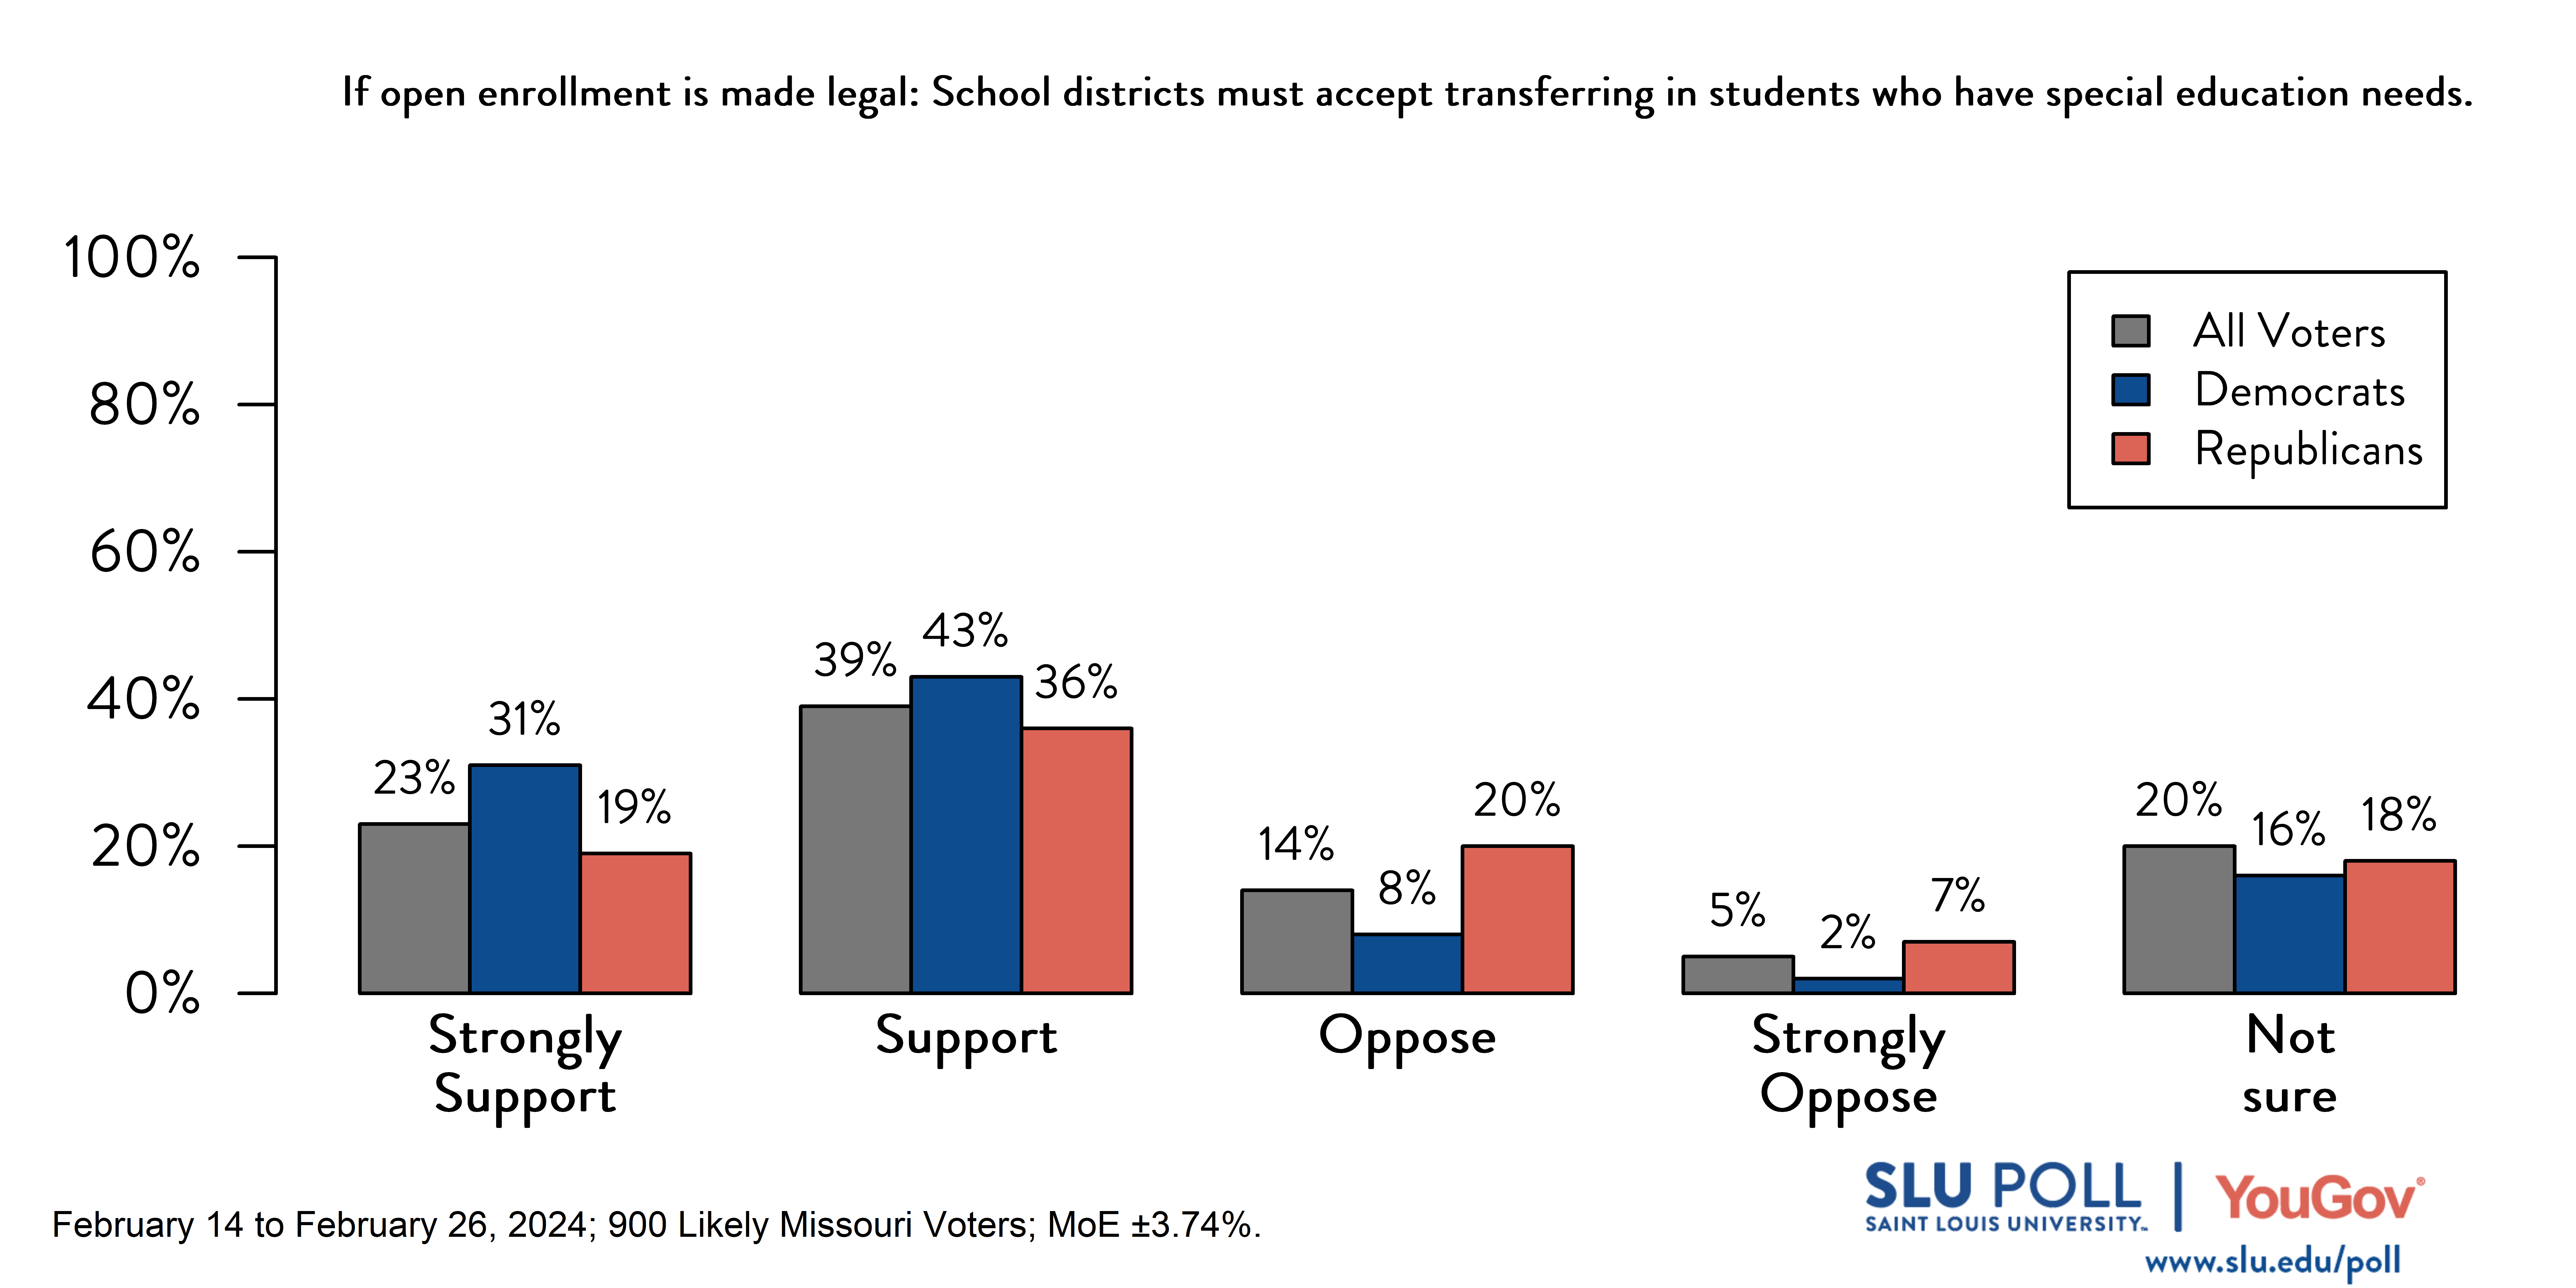 Likely voters' responses to 'If Missouri allows students to enroll in public schools outside their residential school districts (that is, the district where they live), indicate whether you support or oppose the following…School districts must accept transferring in students who have special education needs?': 23% Strongly support, 39% Support, 14% Oppose, 5% Strongly oppose, and 20% Not sure. Democratic voters' responses: ' 31% Strongly support, 43% Support, 8% Oppose, 2% Strongly oppose, and 16% Not sure. Republican voters' responses:  19% Strongly support, 36% Support, 20% Oppose, 7% Strongly oppose, and 18% Not sure.